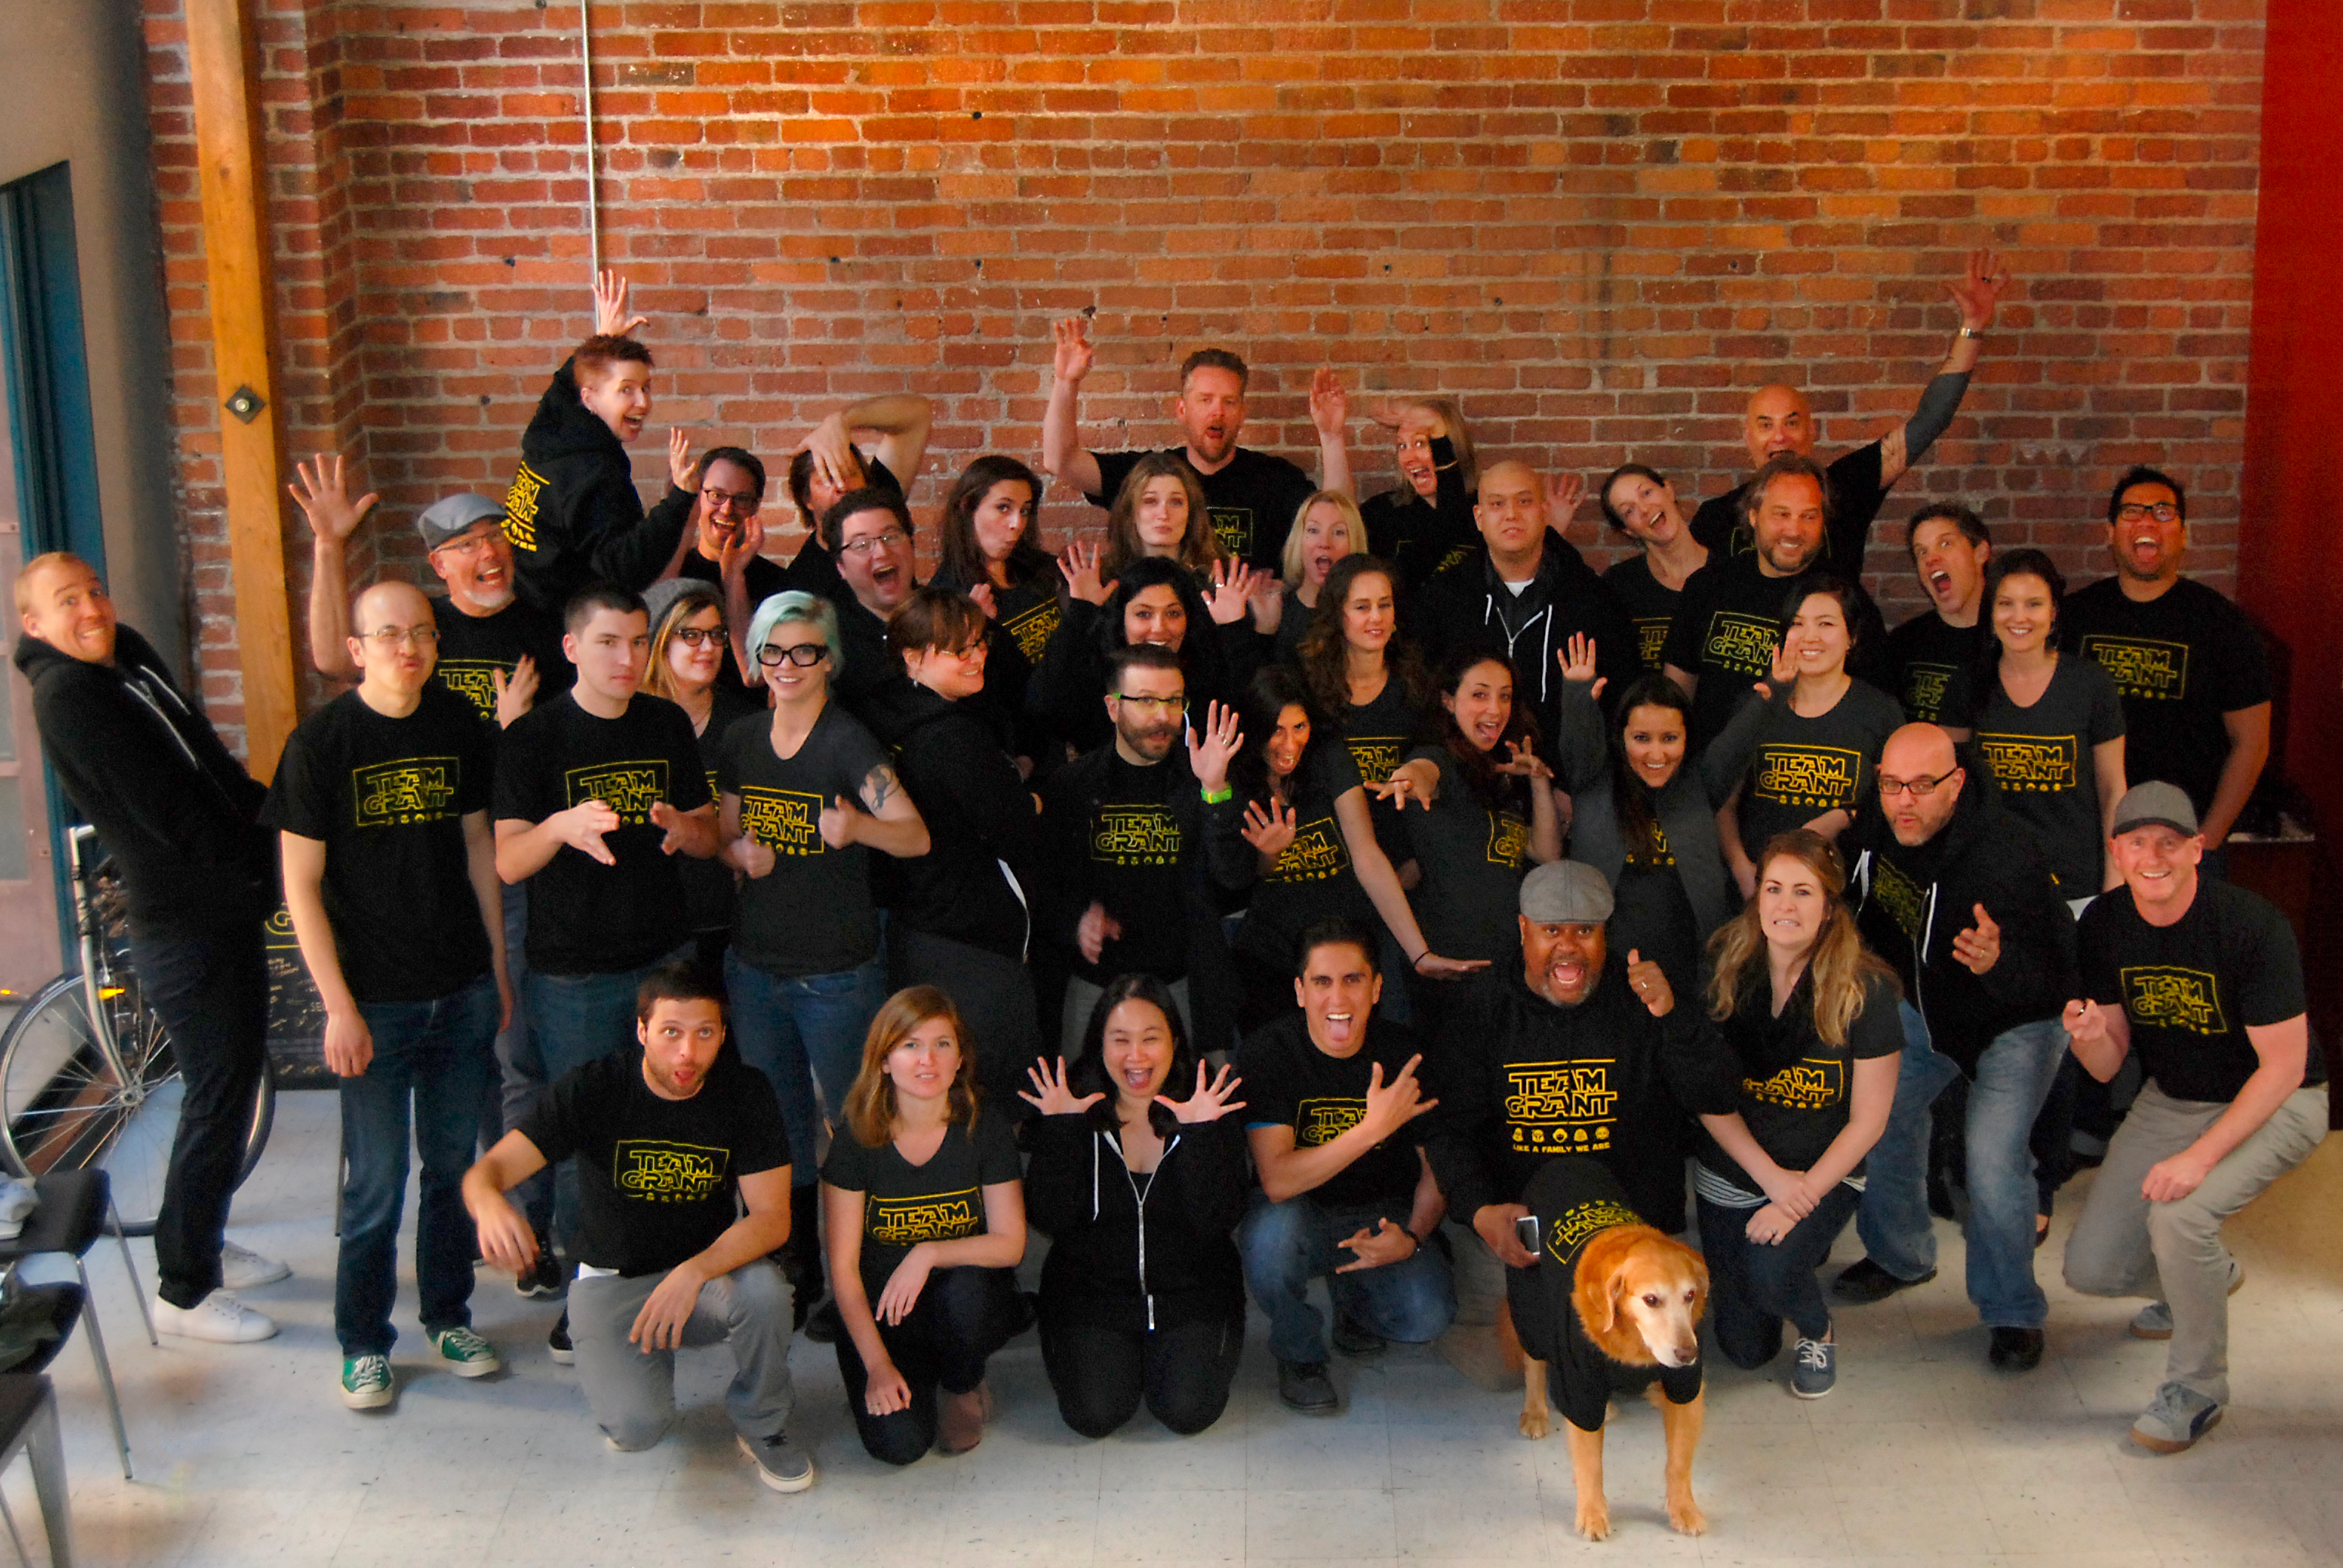 Traction team photo where everyone is wearing a t-shirt with "Team Grant" on it